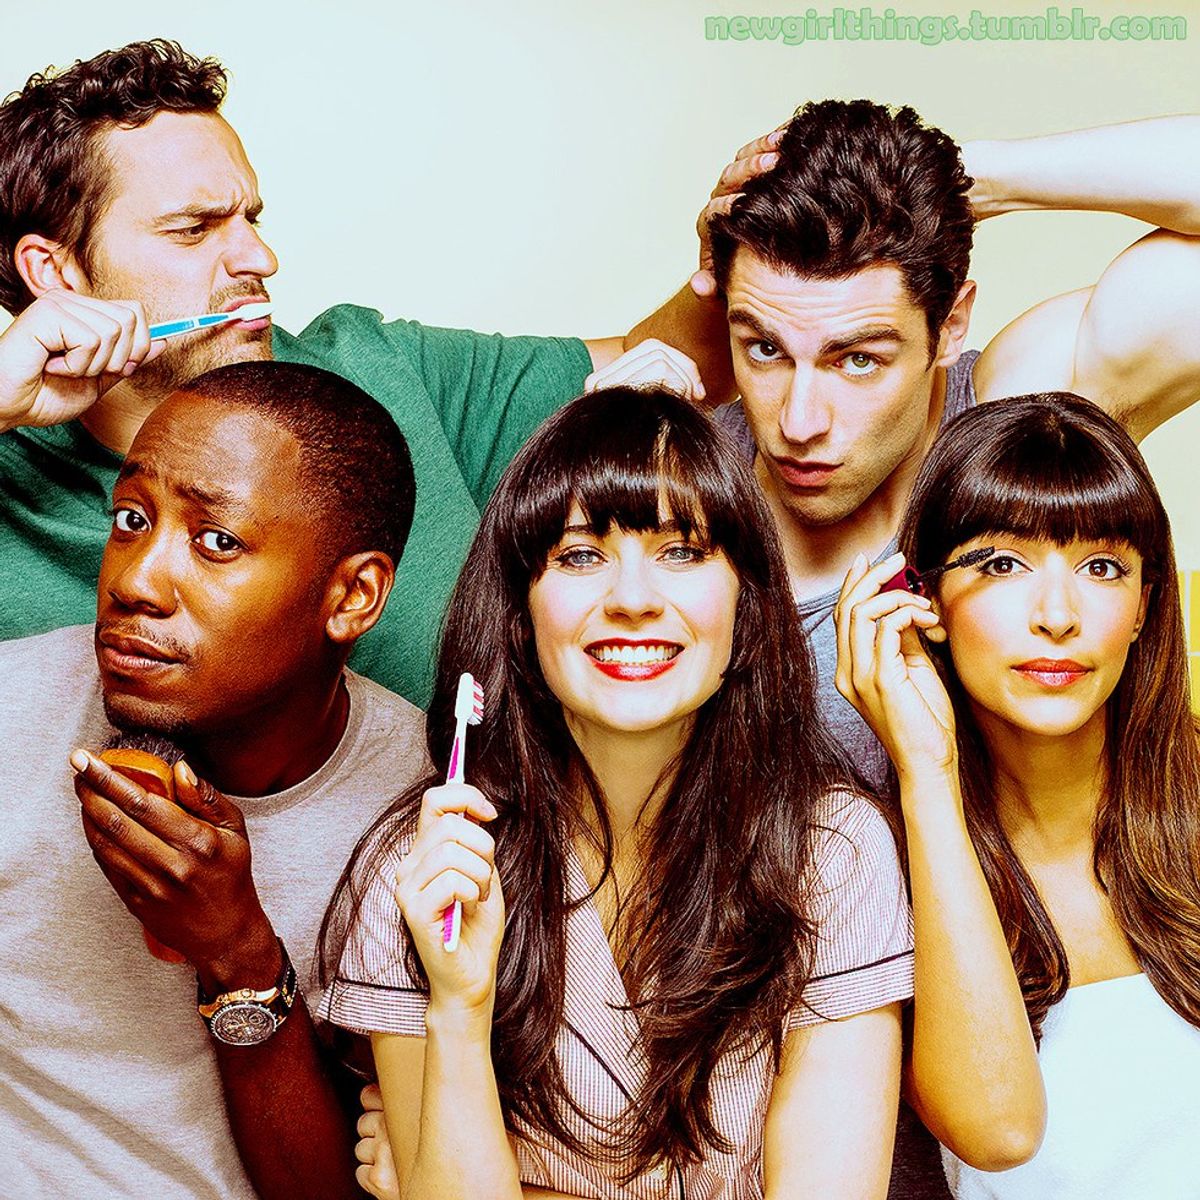 Coming Home From College As Explained By The Cast Of 'New Girl'